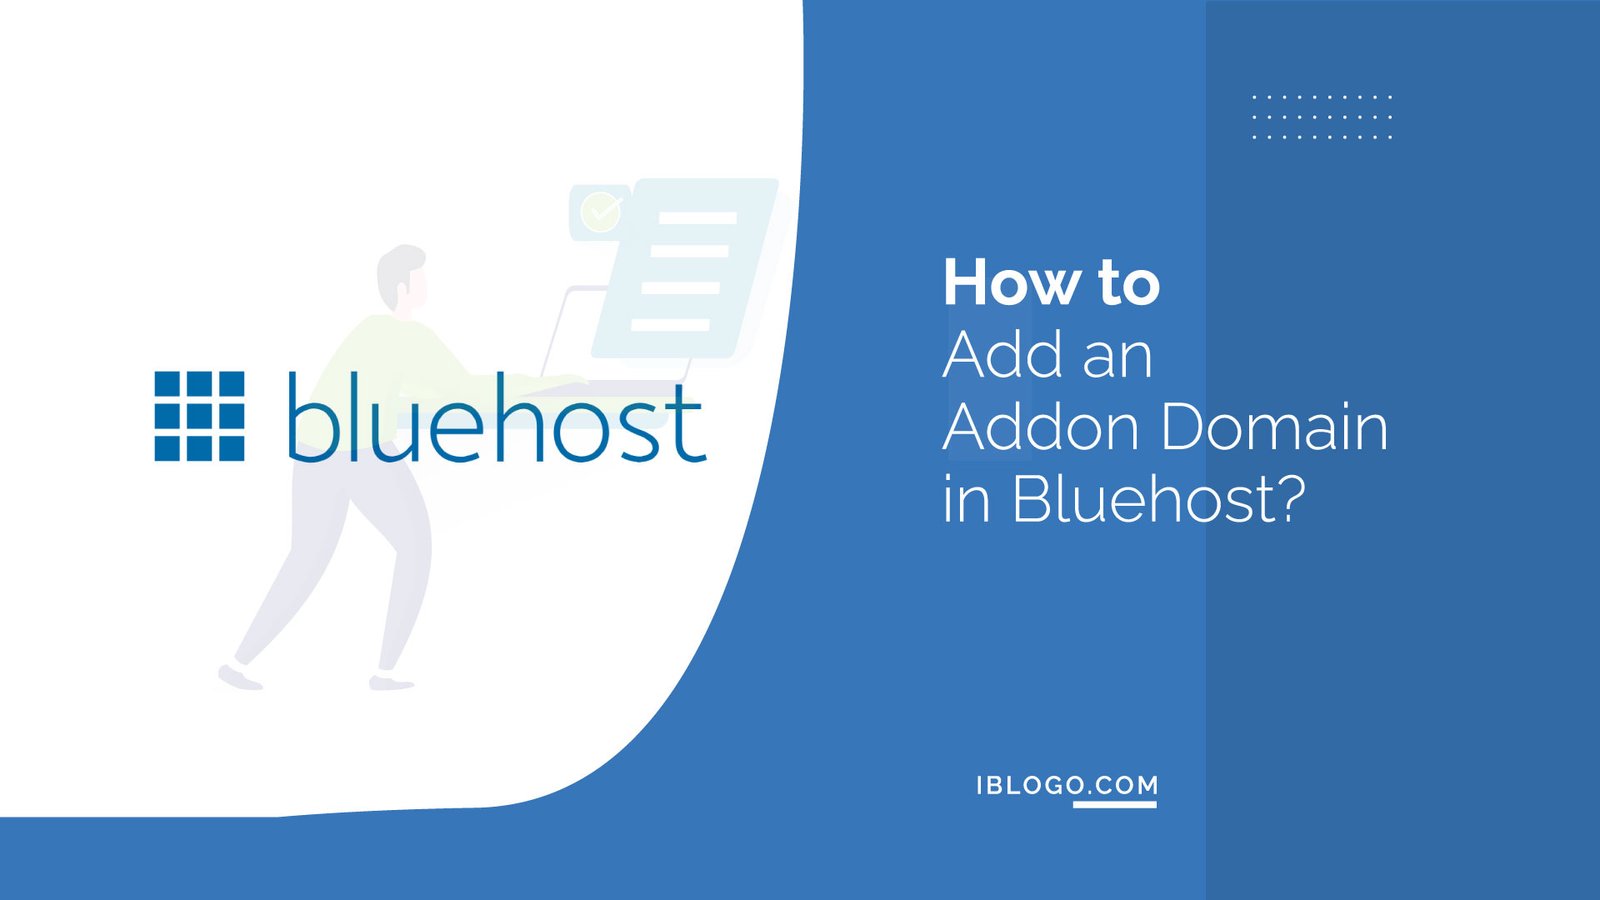 How to Add an Addon Domain in Bluehost